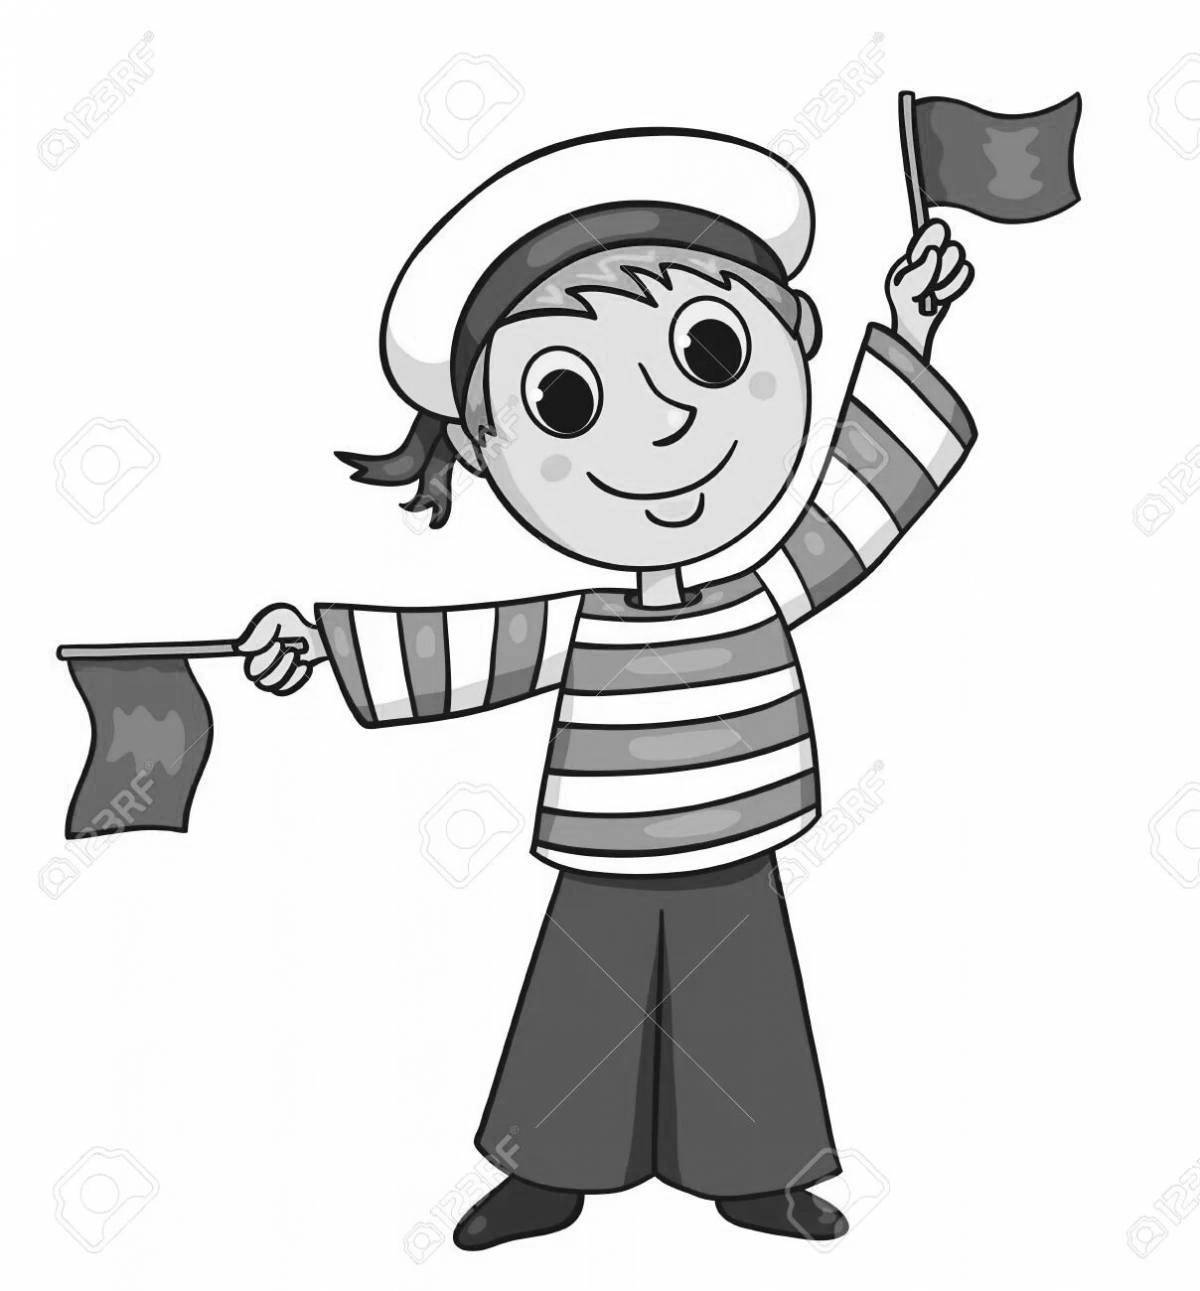 Coloring page majestic sailor with signal flags